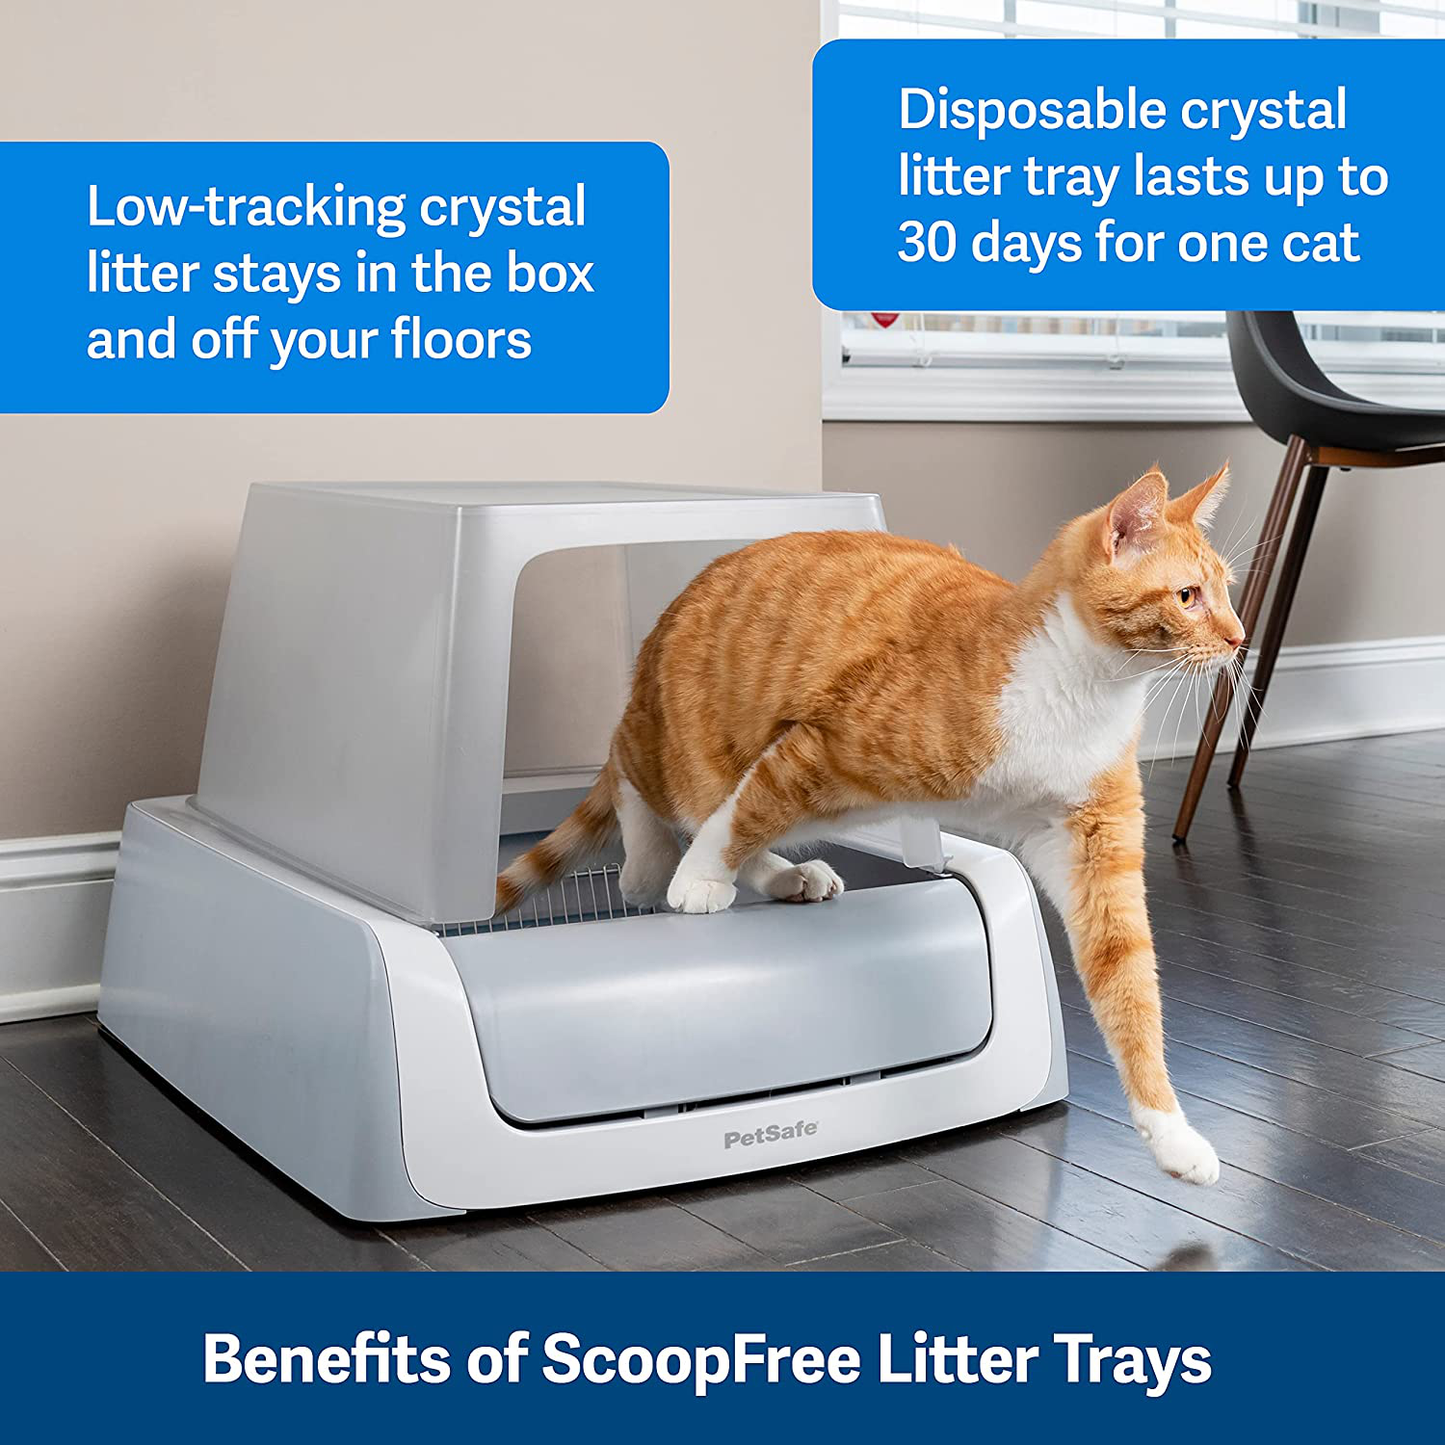 Petsafe Scoopfree Cat Litter Crystal Tray Refills for Scoopfree Self-Cleaning Cat Litter Boxes - 6-Pack - Non-Clumping, Less Mess, Odor Control - Available in Original Blue, Lavender, or Sensitive Animals & Pet Supplies > Pet Supplies > Cat Supplies > Cat Litter PetSafe   